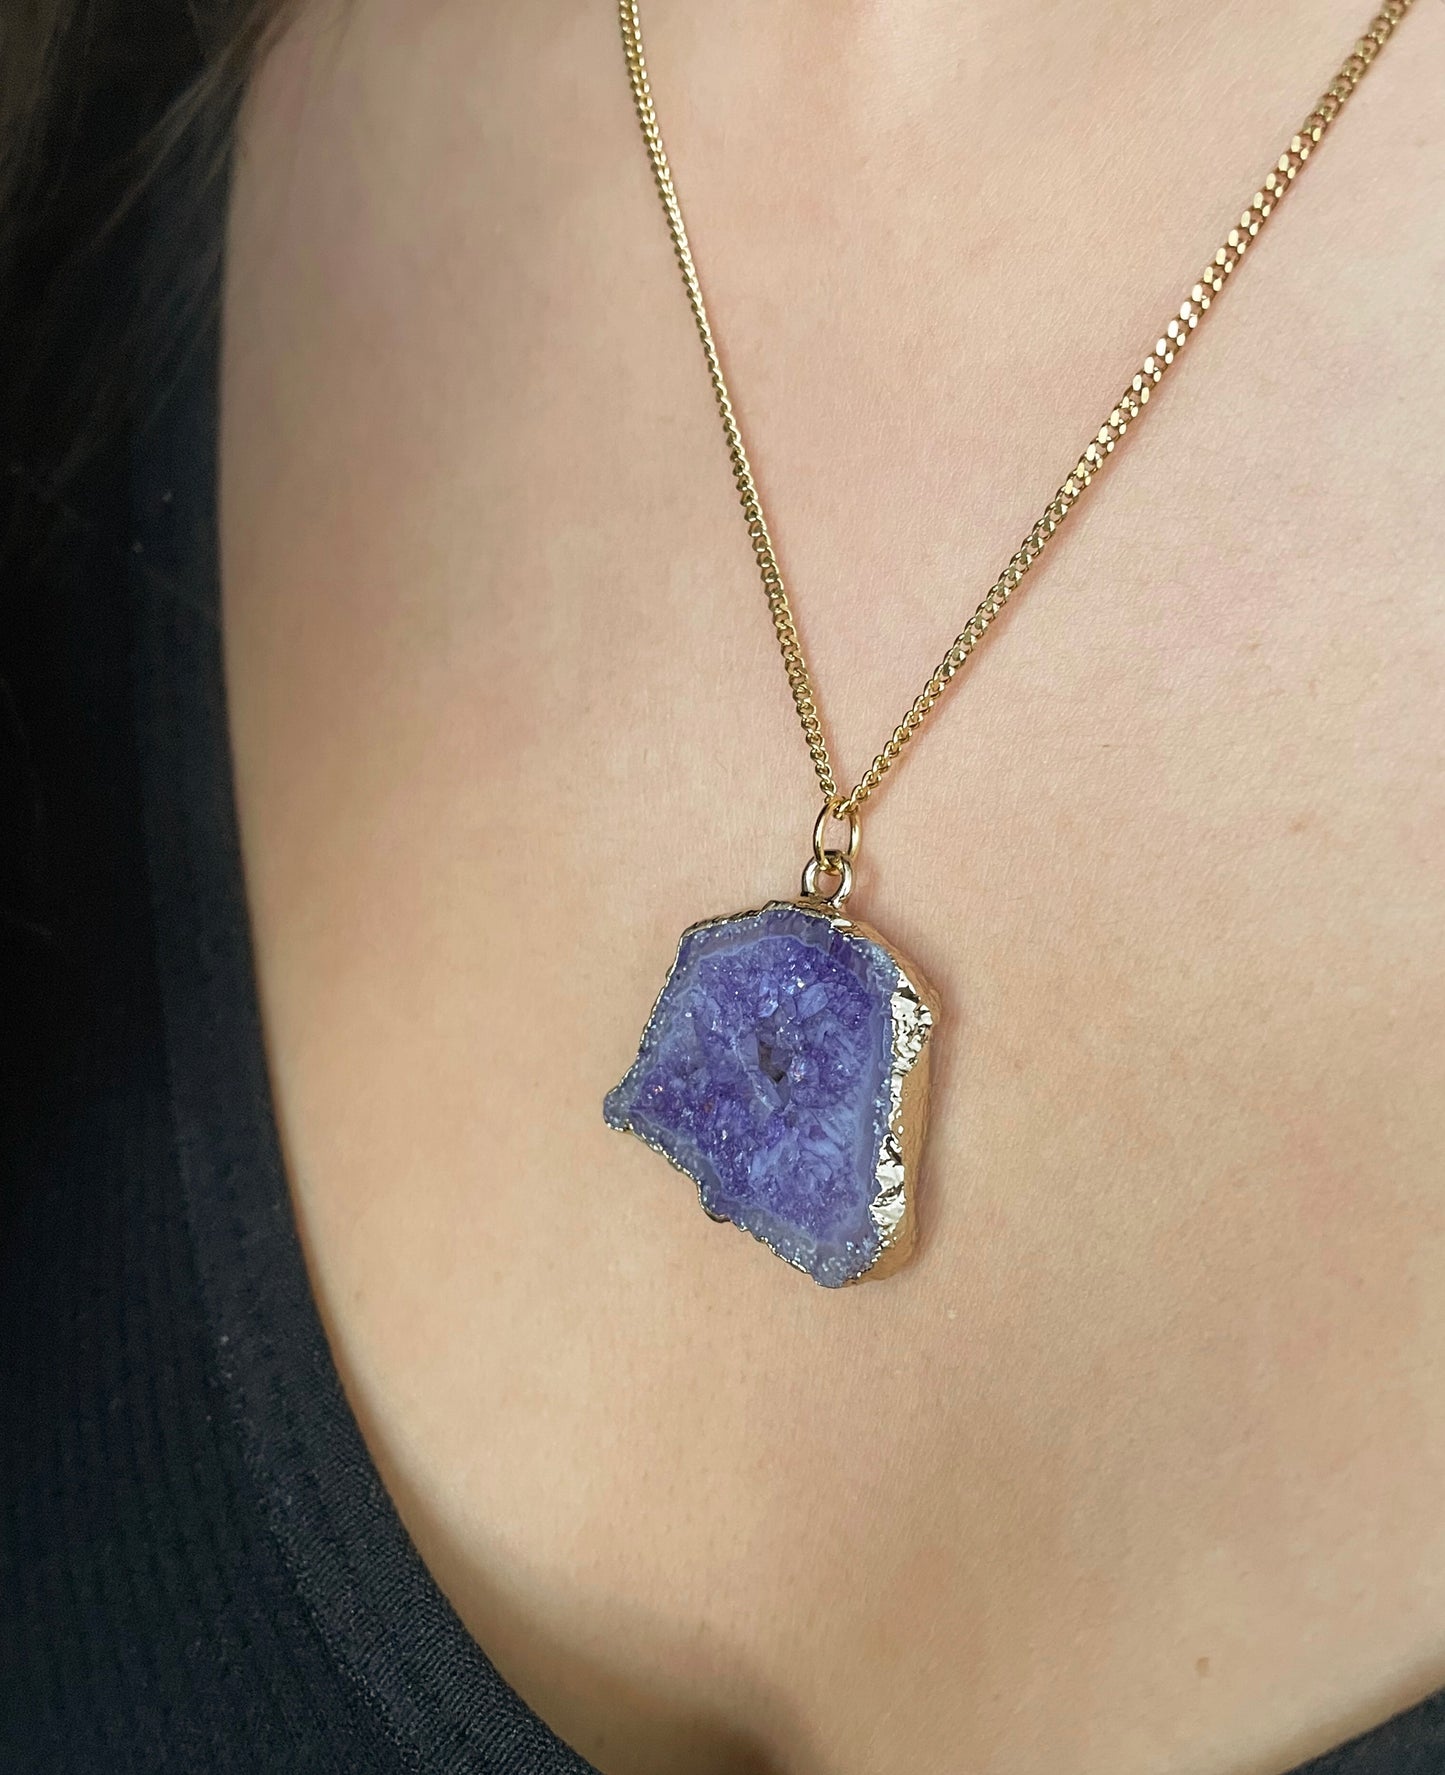 Agate geode necklace 15 (purple/gold)